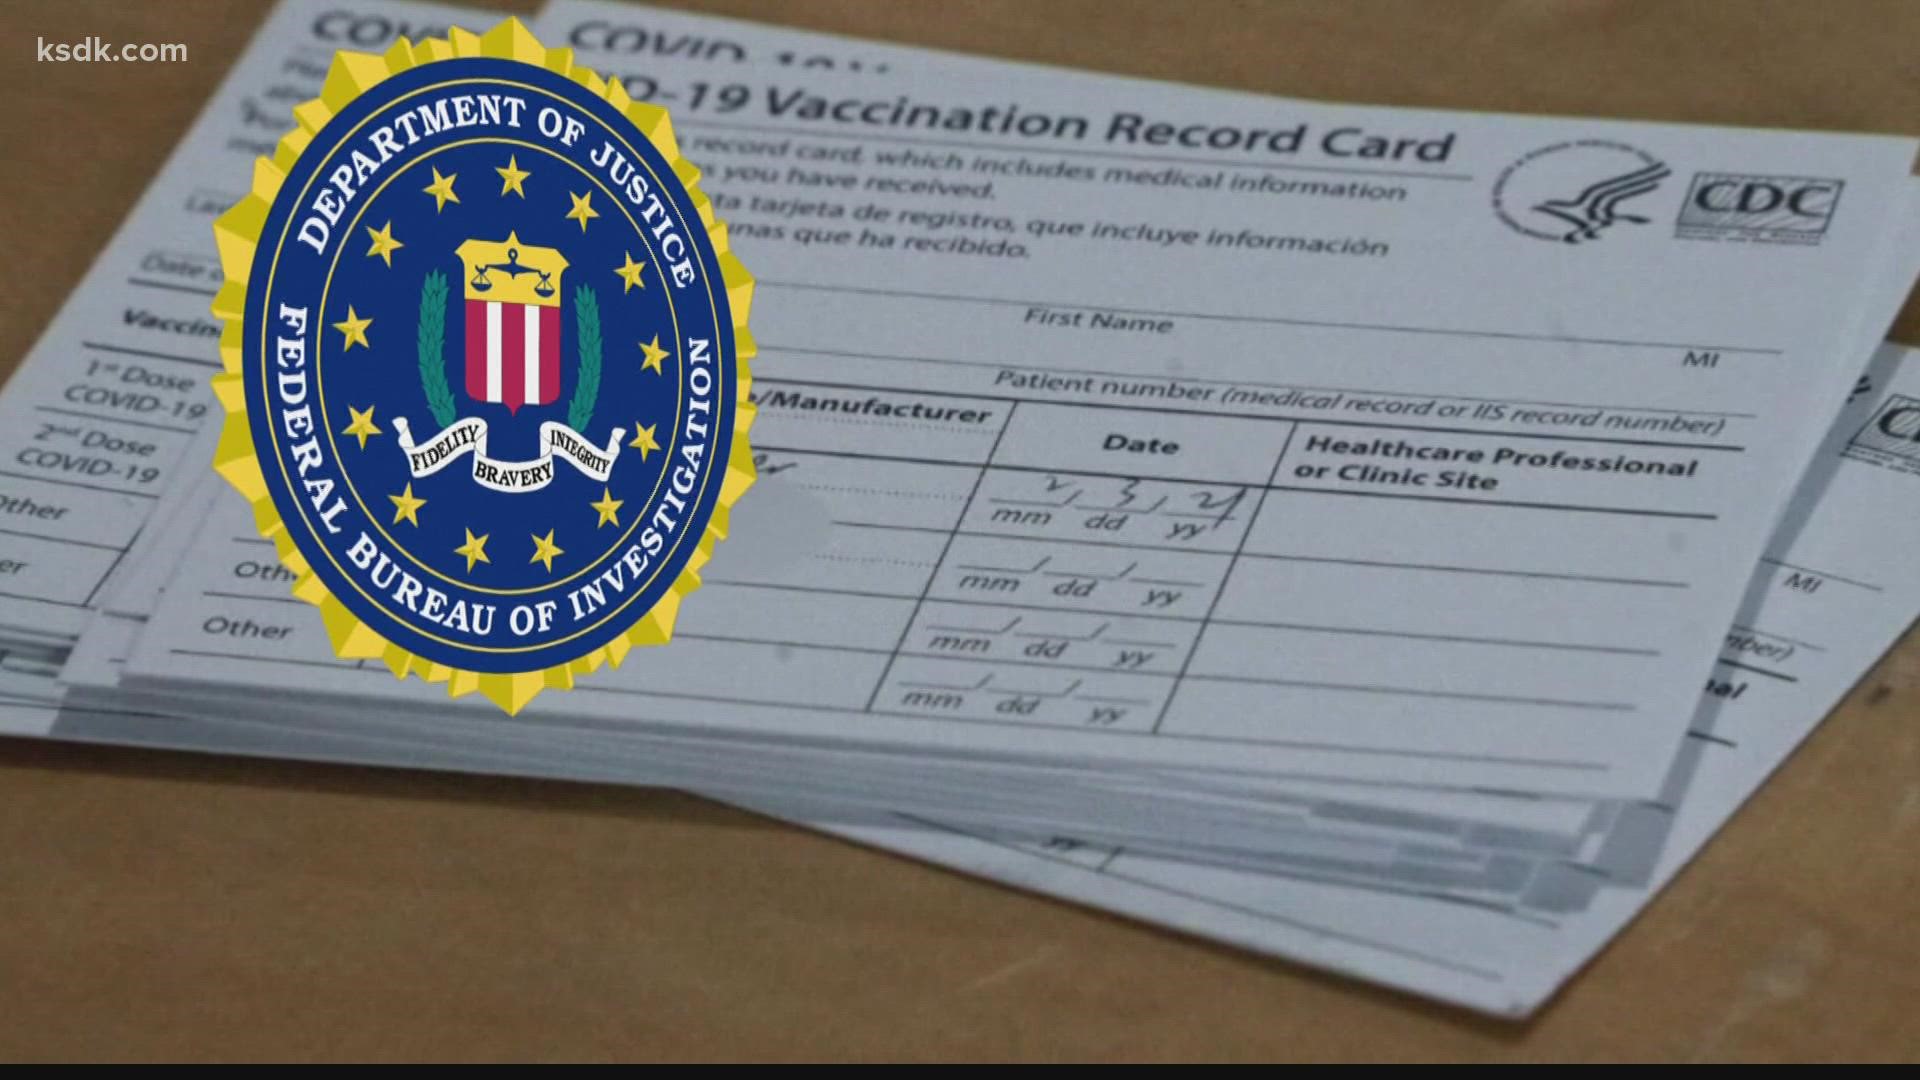 Currently there's no federal system to authenticate vaccination cards. That makes it easy for counterfeiters.